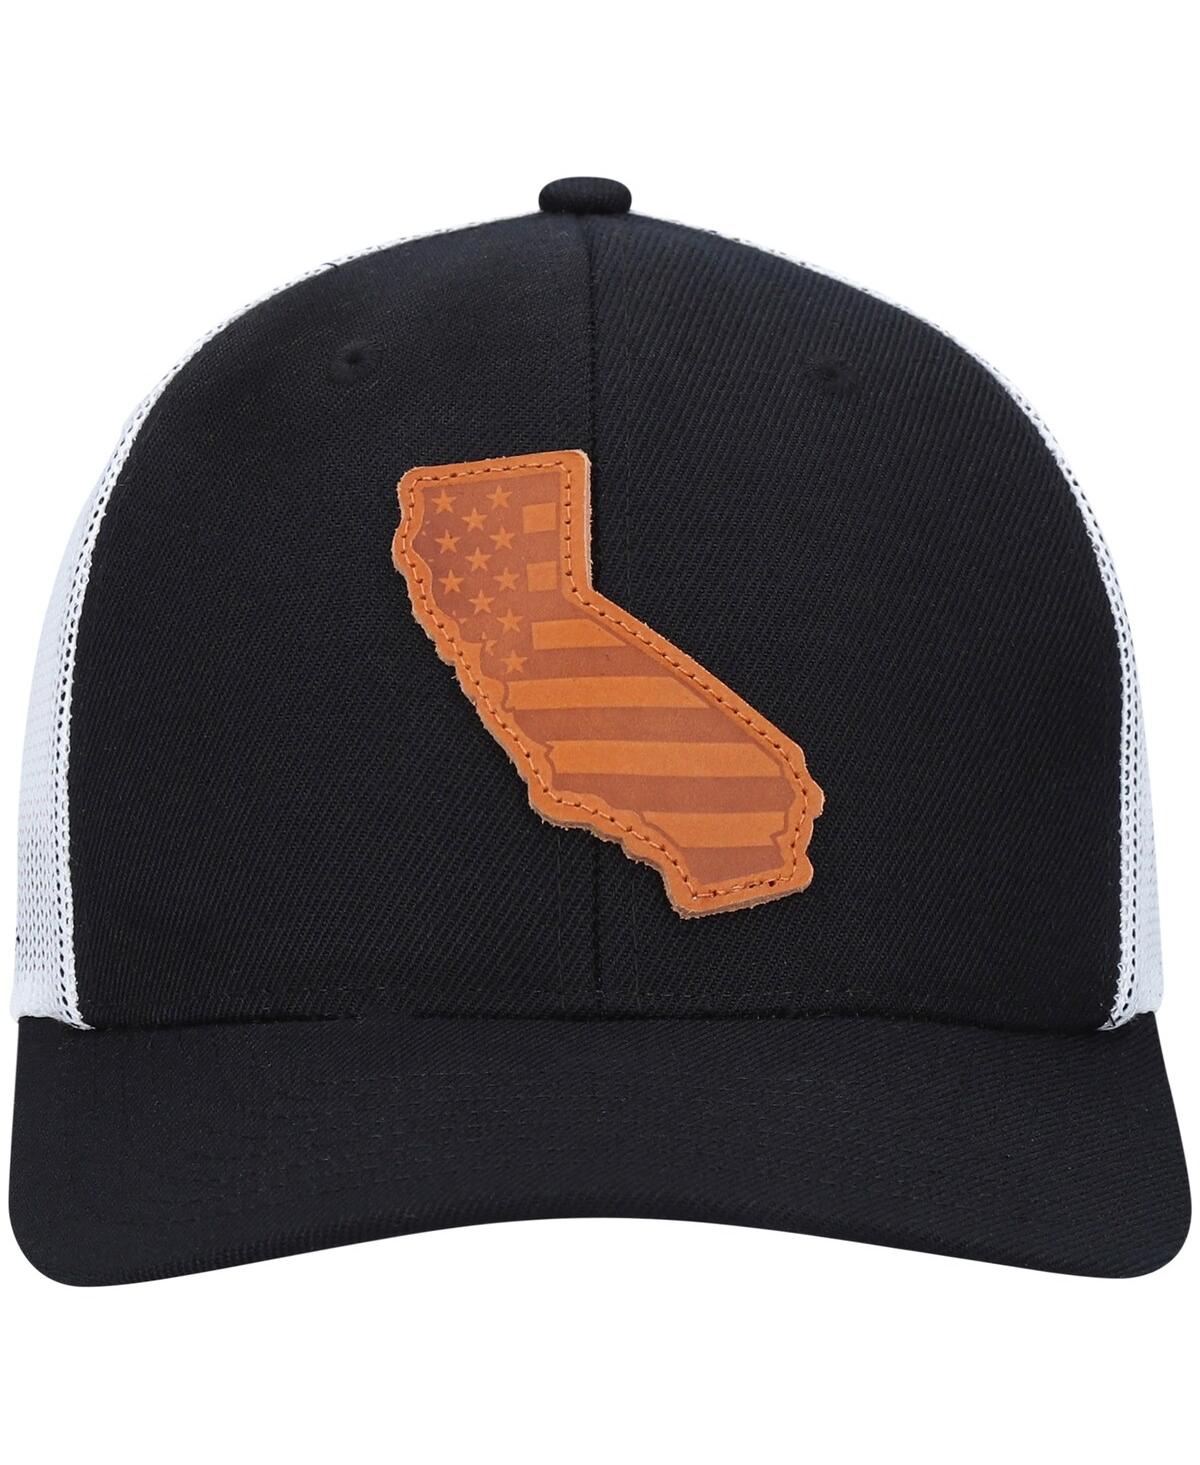 Shop Local Crowns Men's  Black California Leather Patch Trucker Snapback Hat